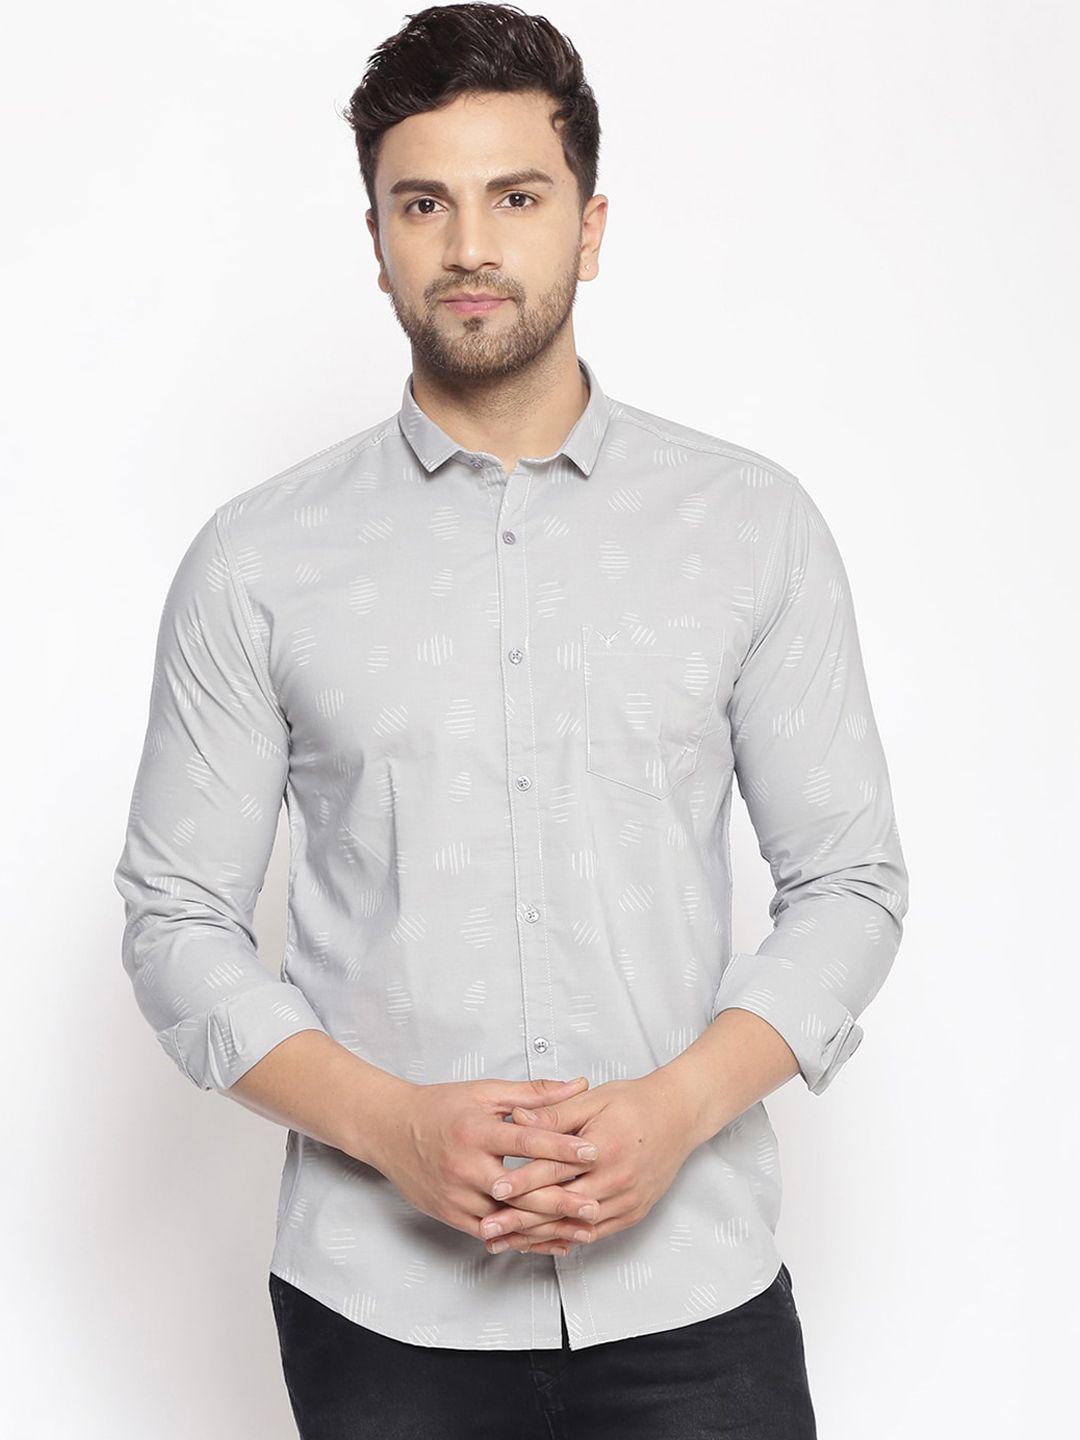 showoff-men-grey-&-white-cotton-classic-slim-fit-printed-casual-shirt